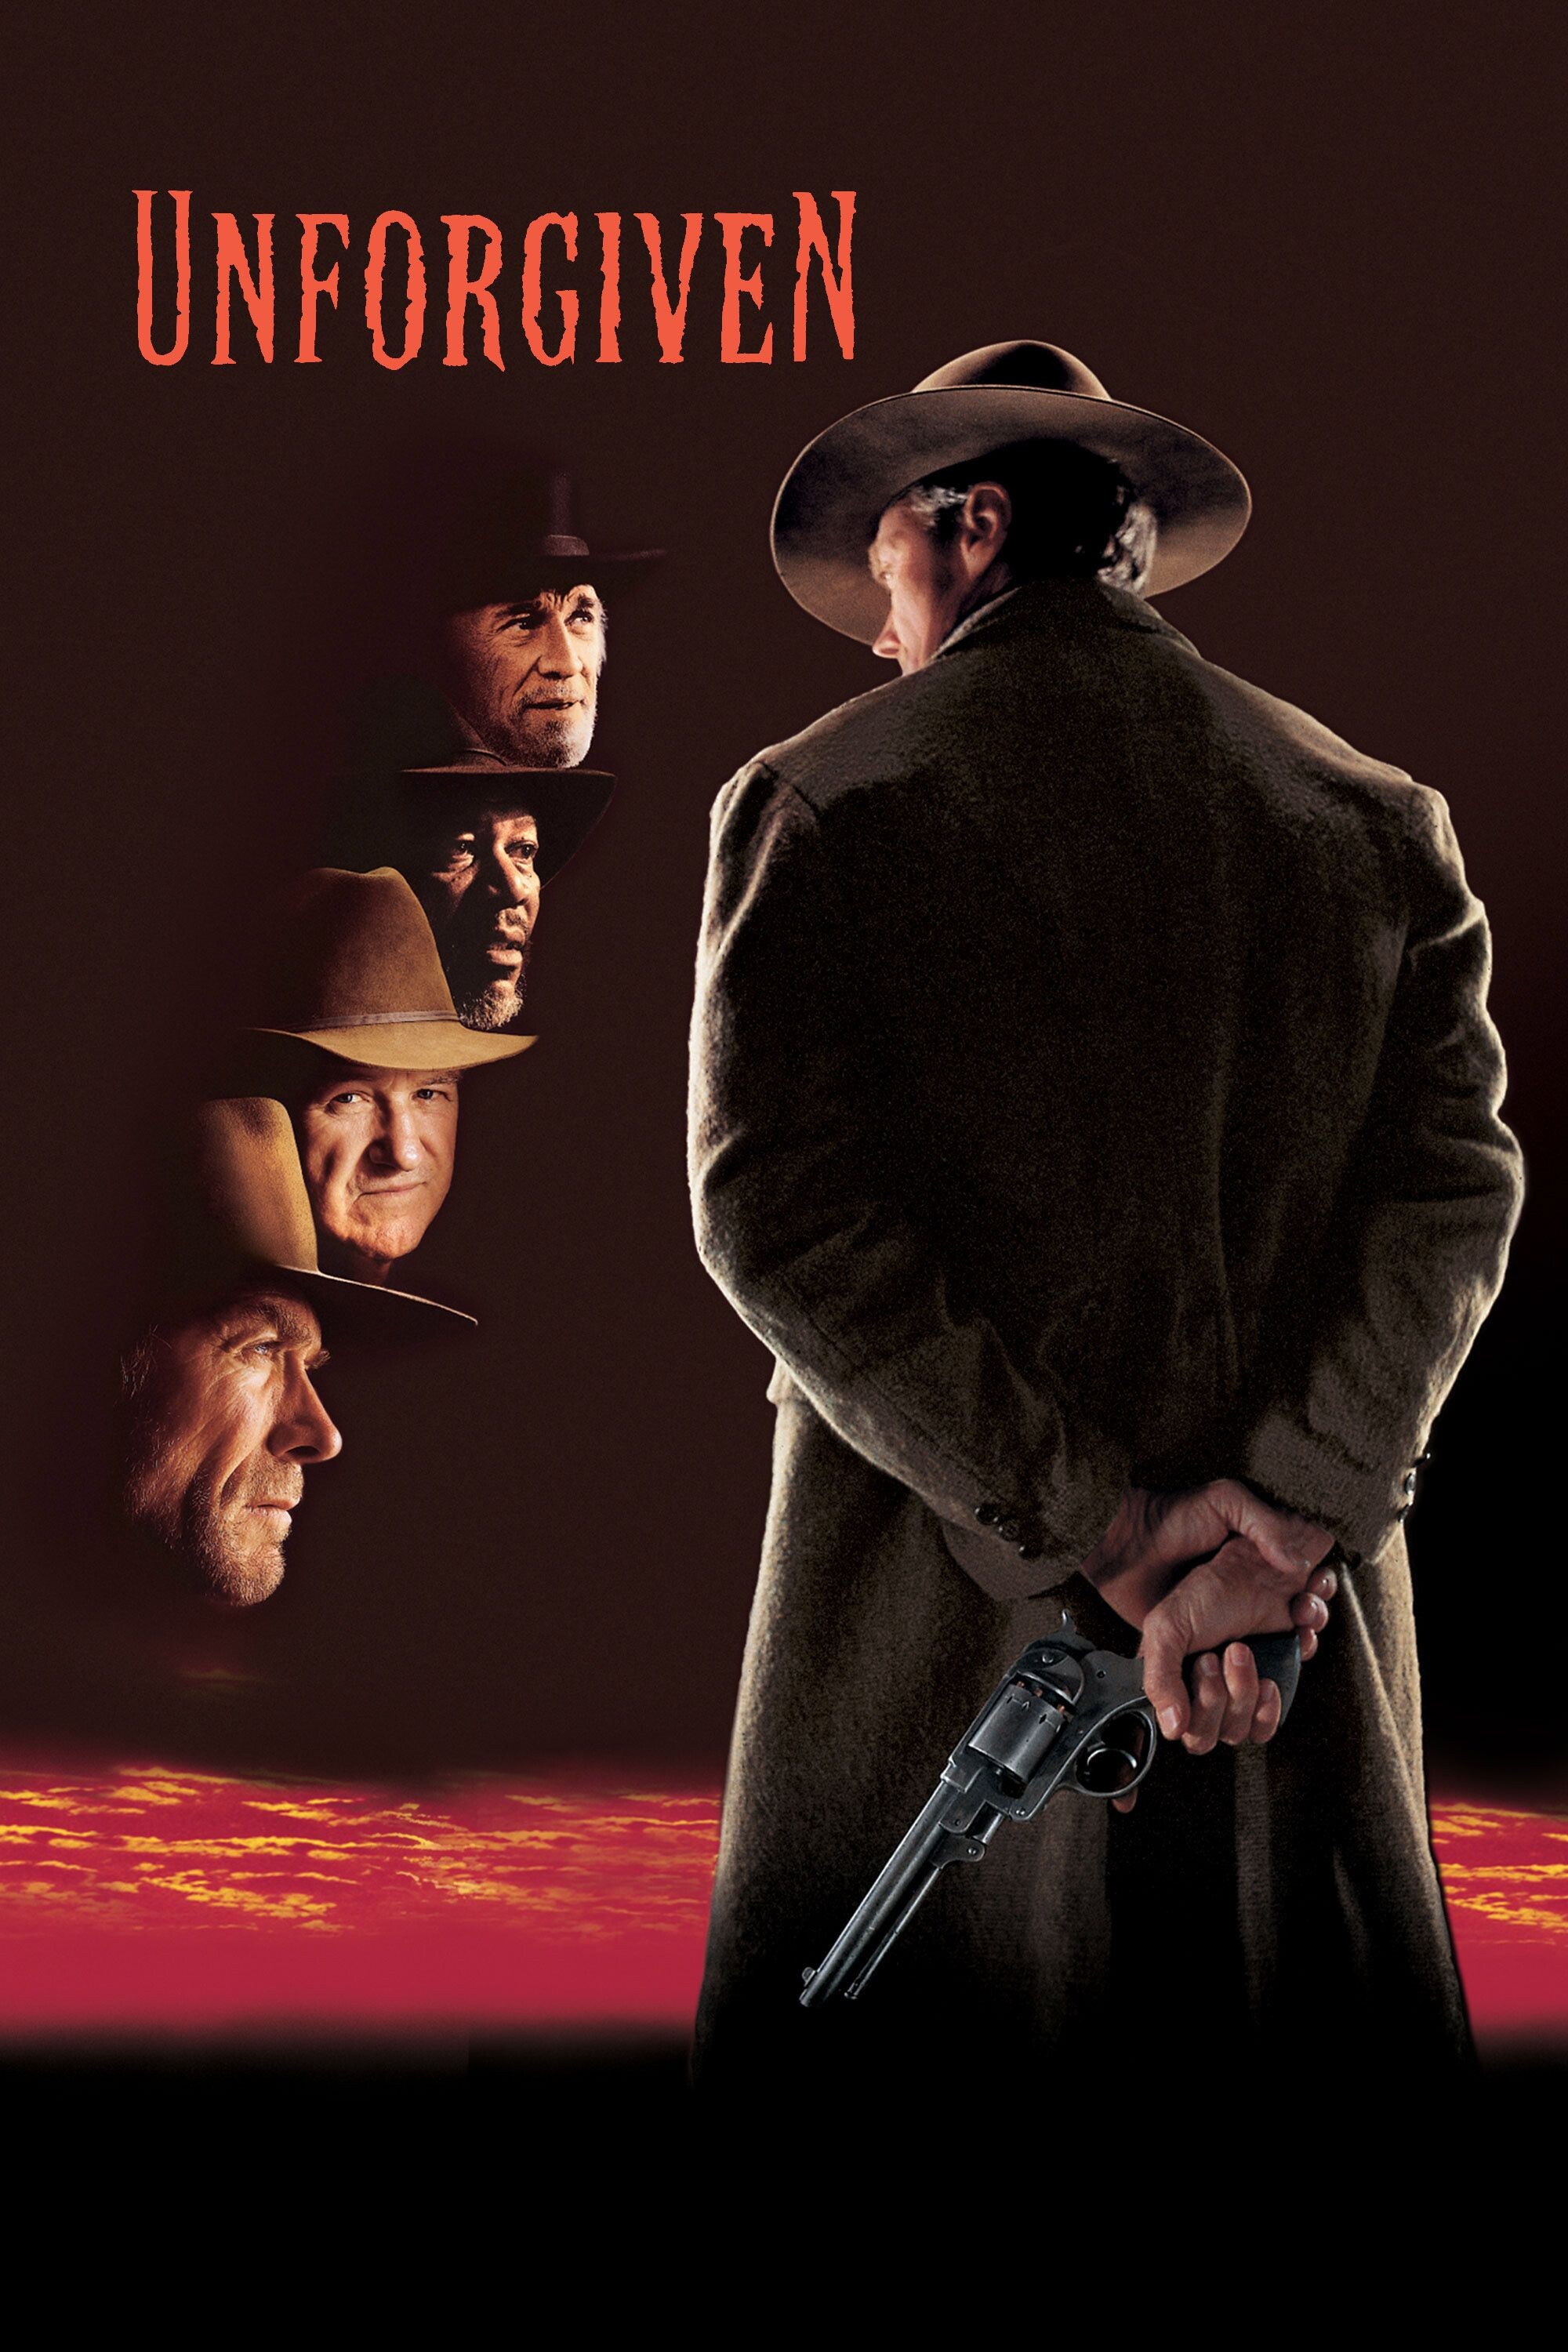 Clint Eastwood: The "Unforgiven" Movie, Theatrical Release Poster By Bill Gold, Revisionist Western Of 1992, Written By David Webb Peoples. 2000x3000 HD Background.